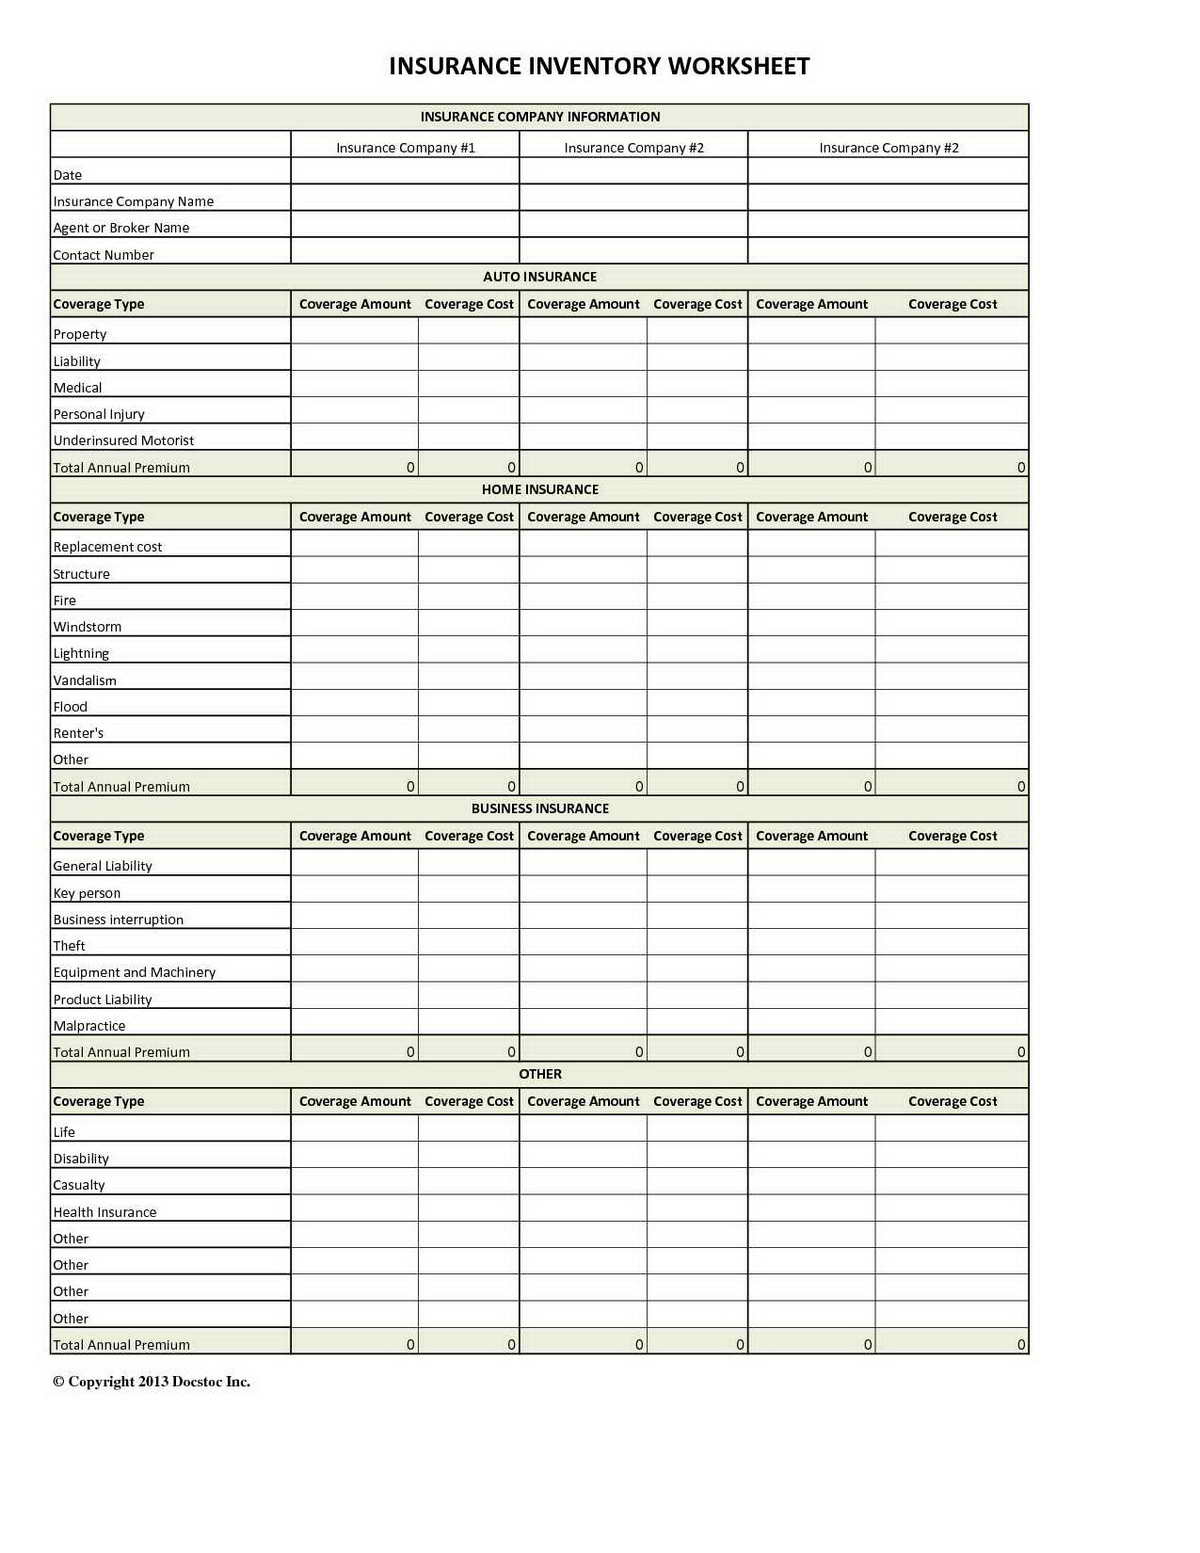 Business Valuation Spreadsheet Template Throughout Business Valuation Spreadsheet With Excel Sheet Template Images Home